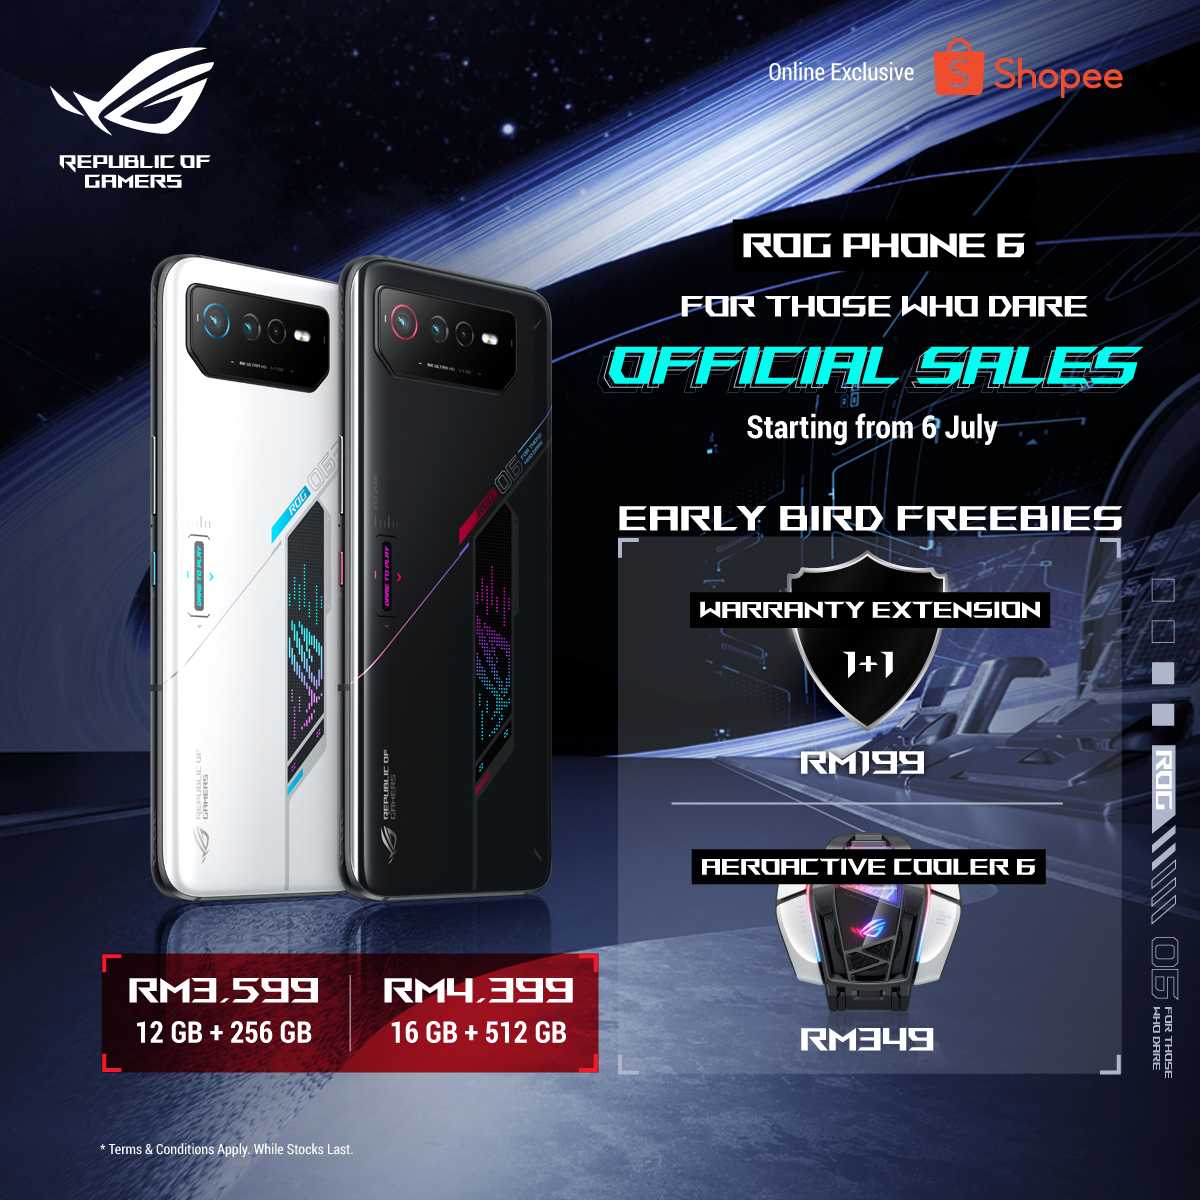 ASUS Republic of Gamers Unveils the ROG Phone 6 Series